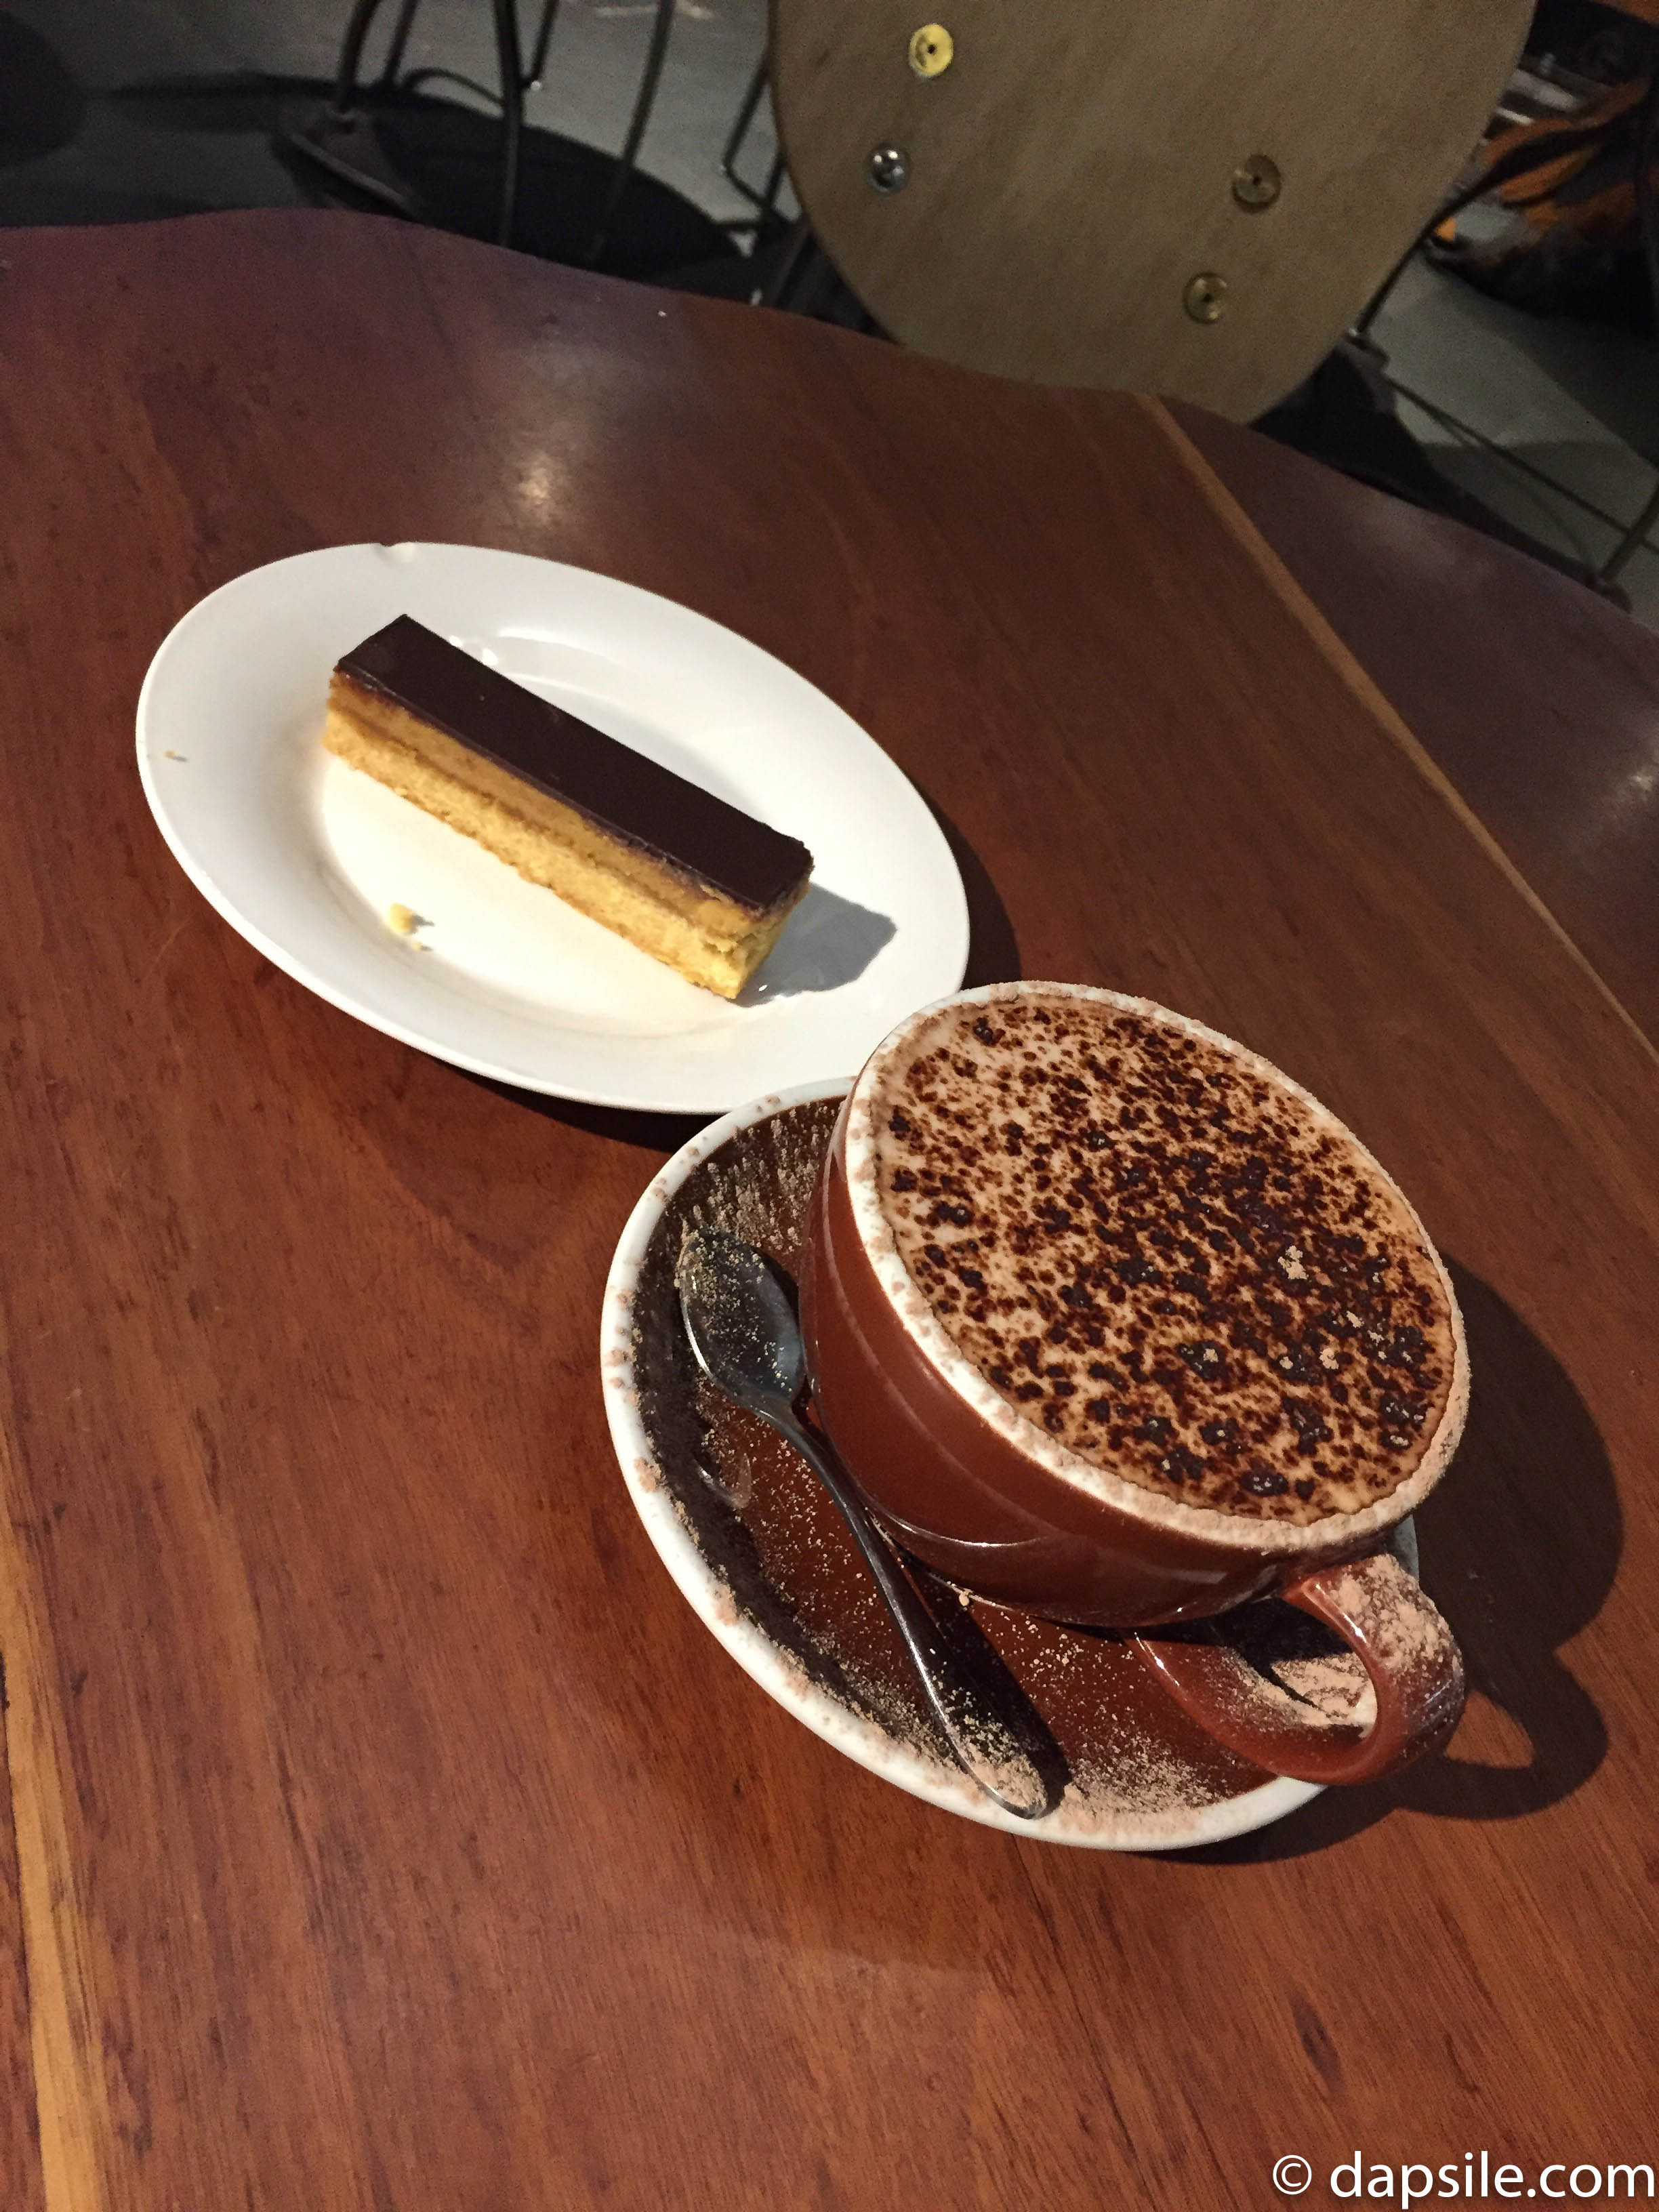 Hot Chocolate and Treat at Clark’s Cafe in Wellington New Zealand Central Library